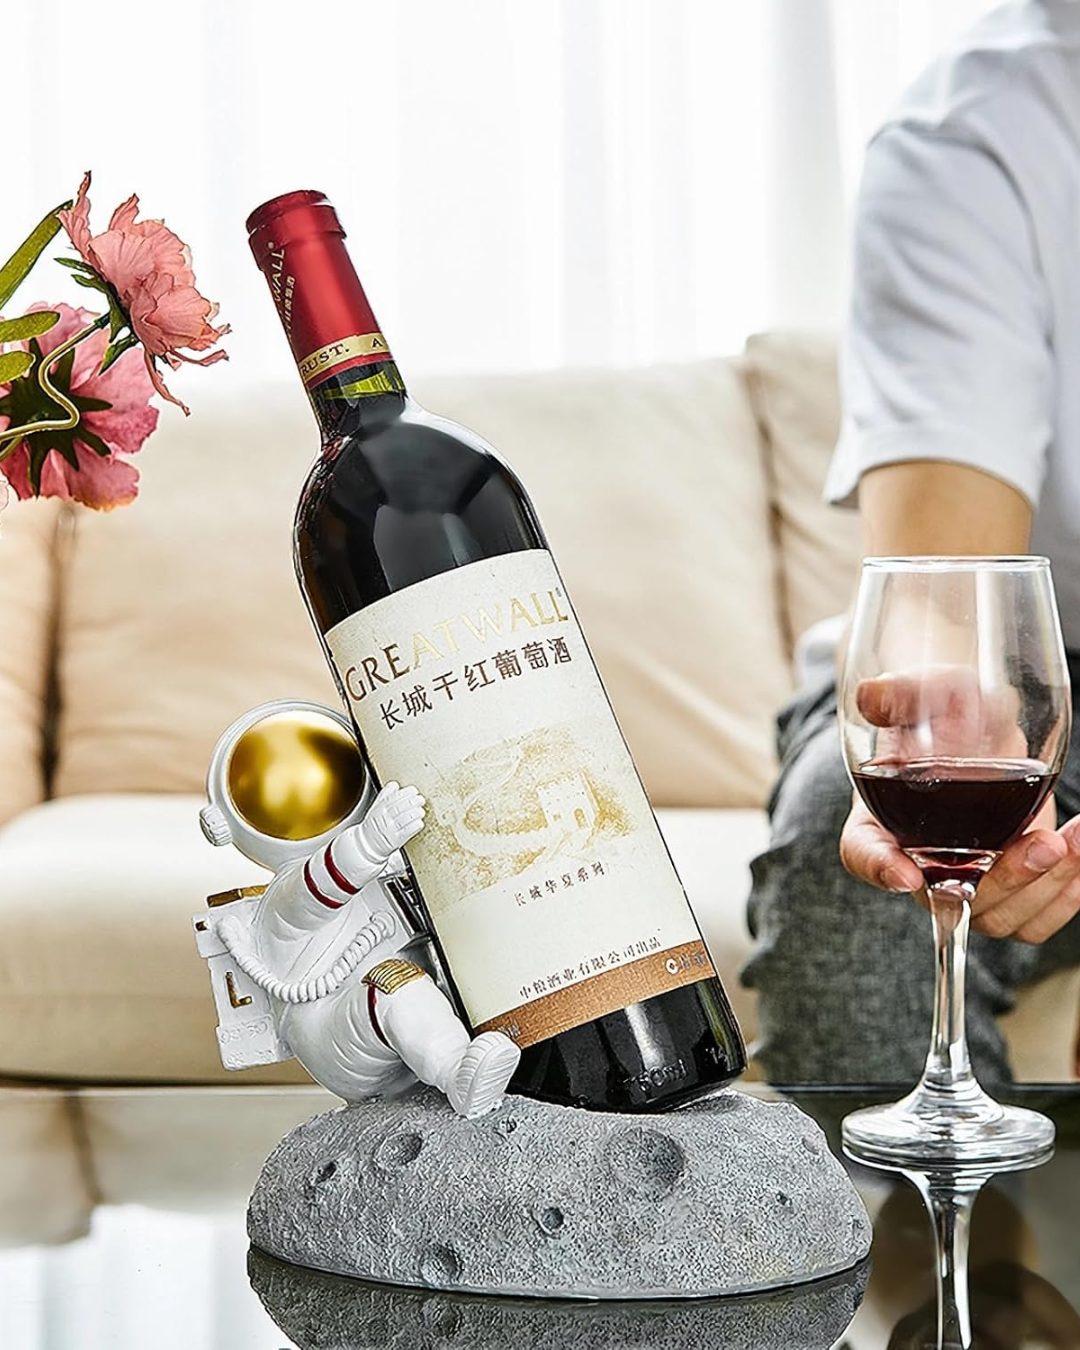 20 Decorative Wine Bottle Holders That are Cute and Quirky